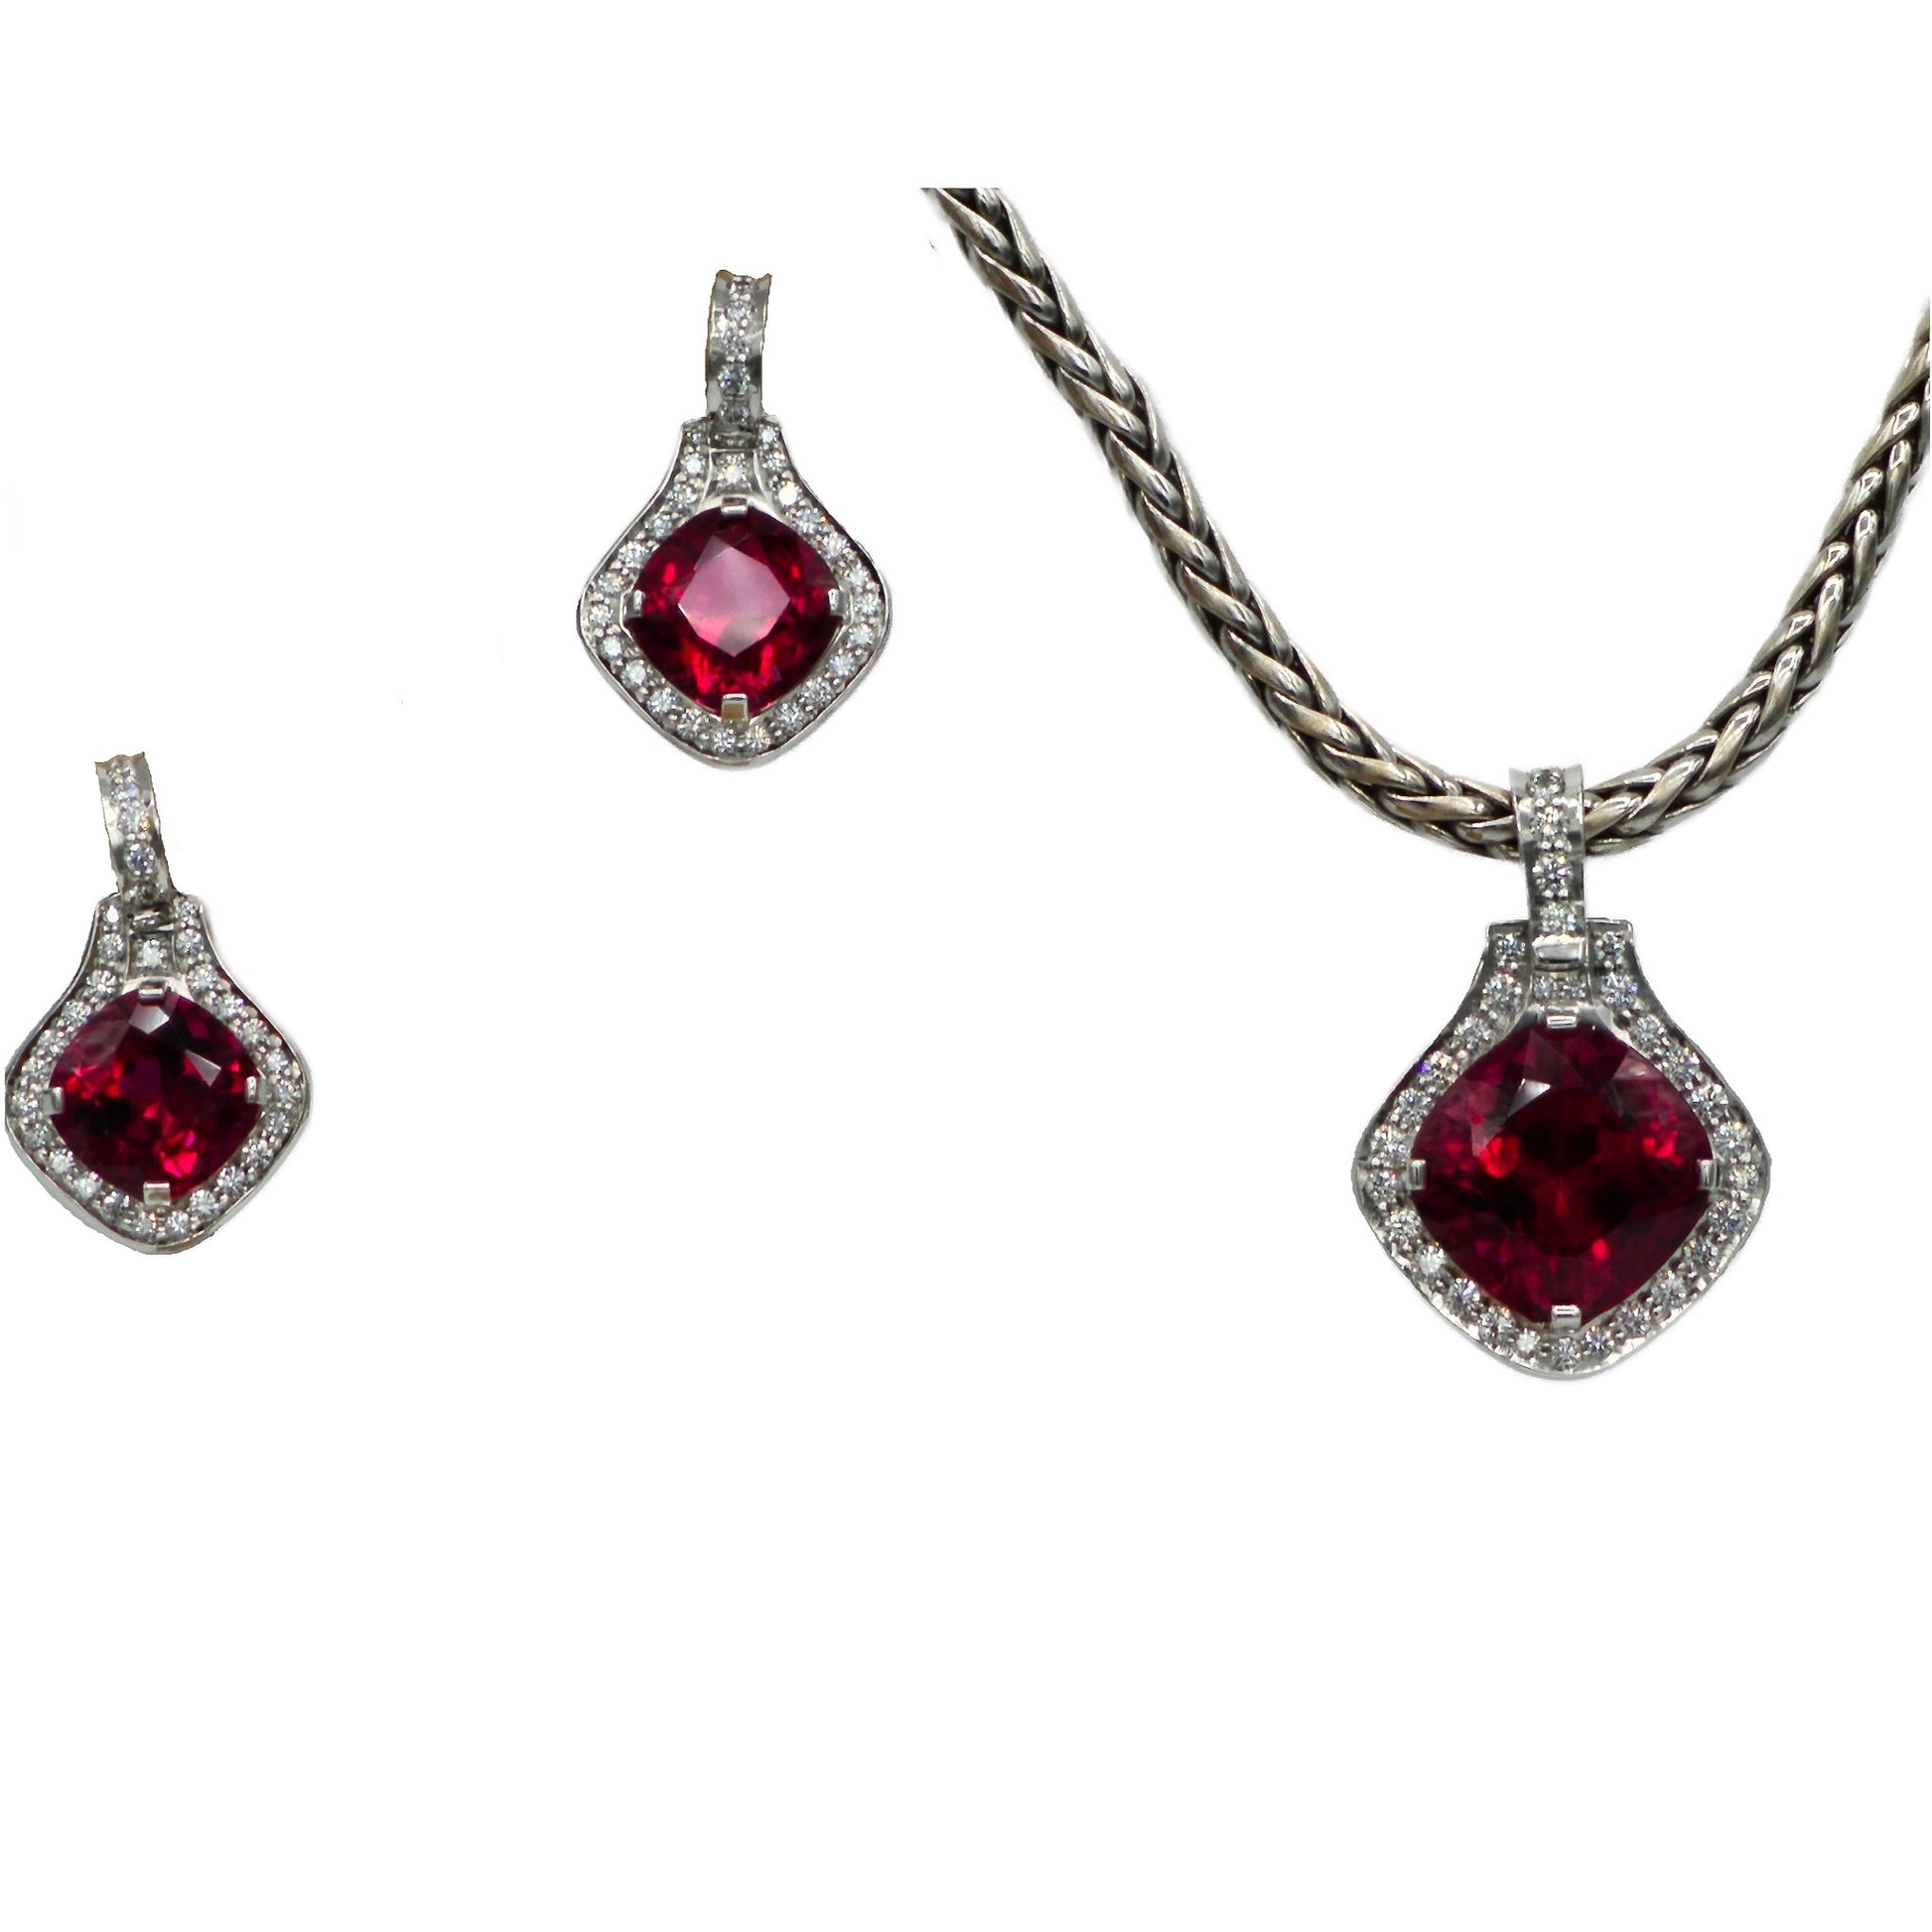 Rubellite Red Tourmaline Pendant and Earrings